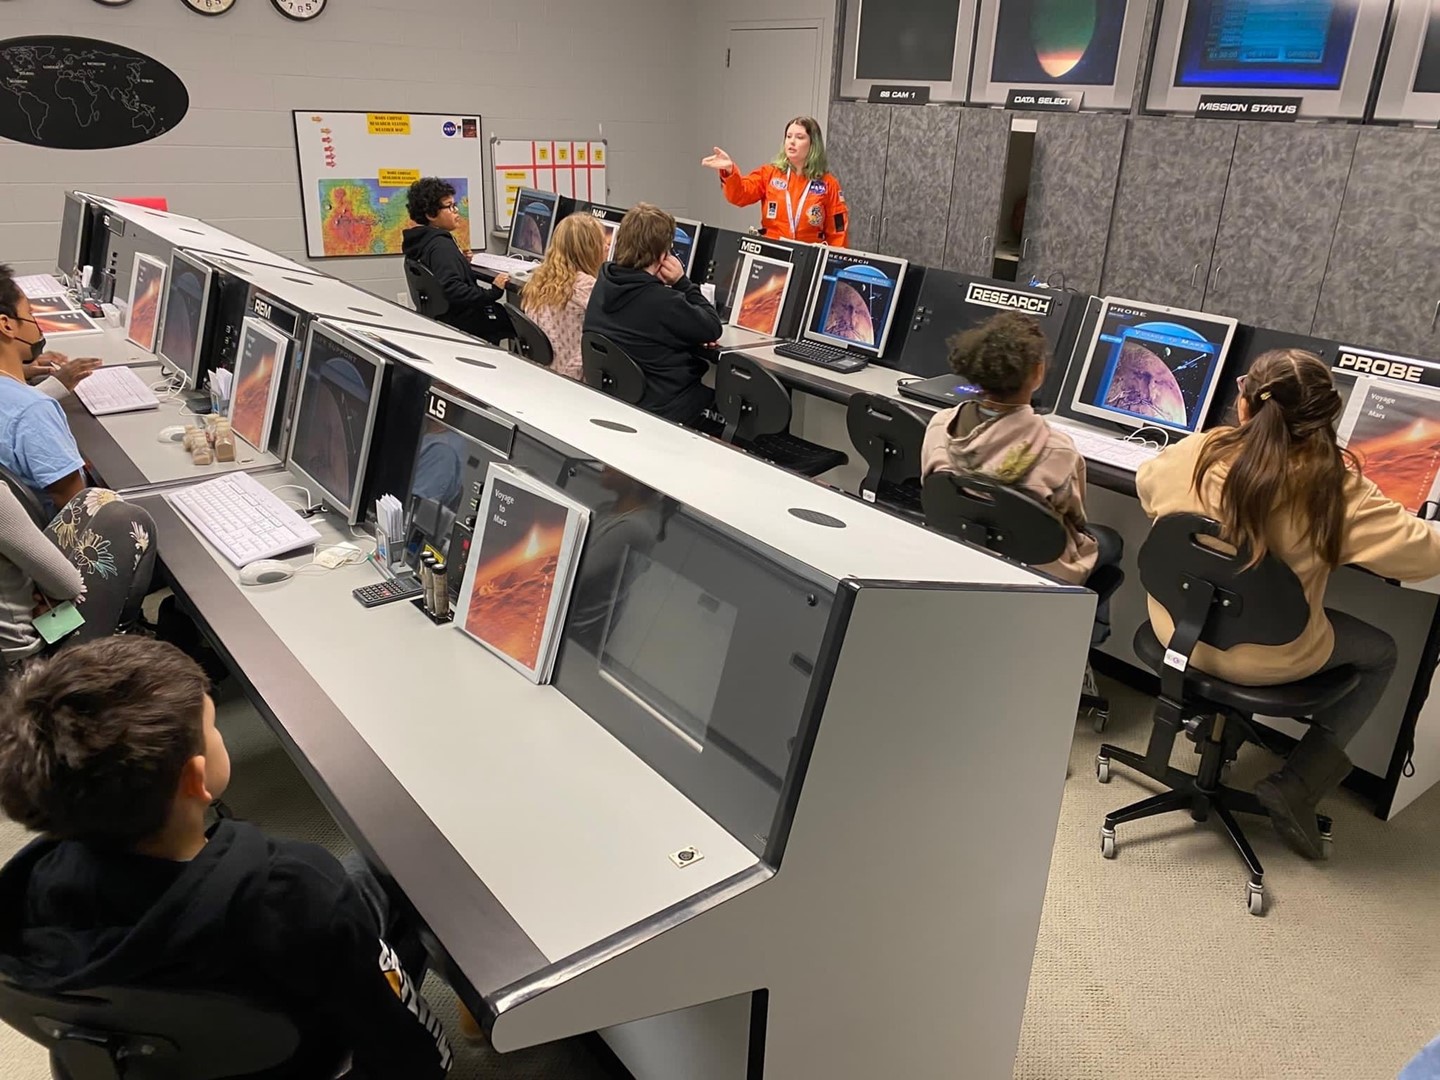 Students sitting at consoles made to look like Nasa&#39;s mission control.